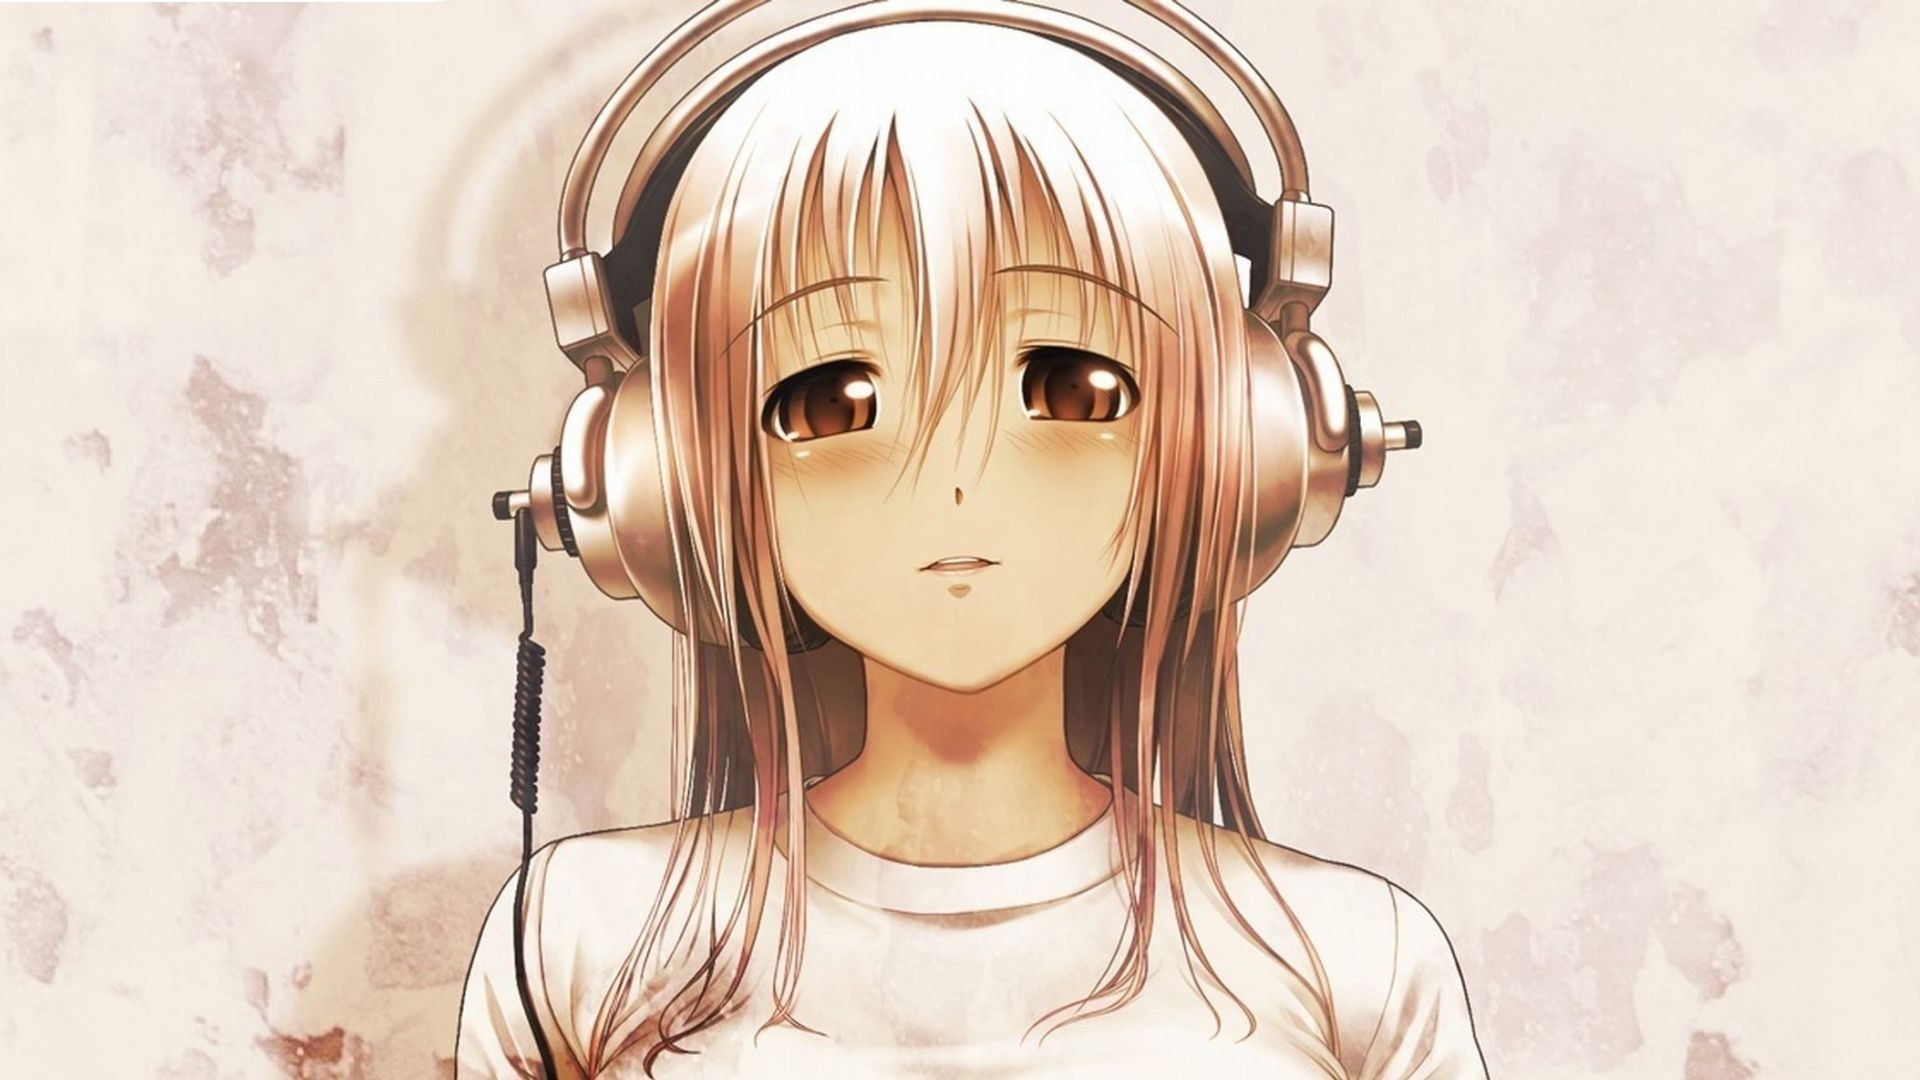 Free Download Cute Anime Music Wallpaper 6783618 1920x1080 For